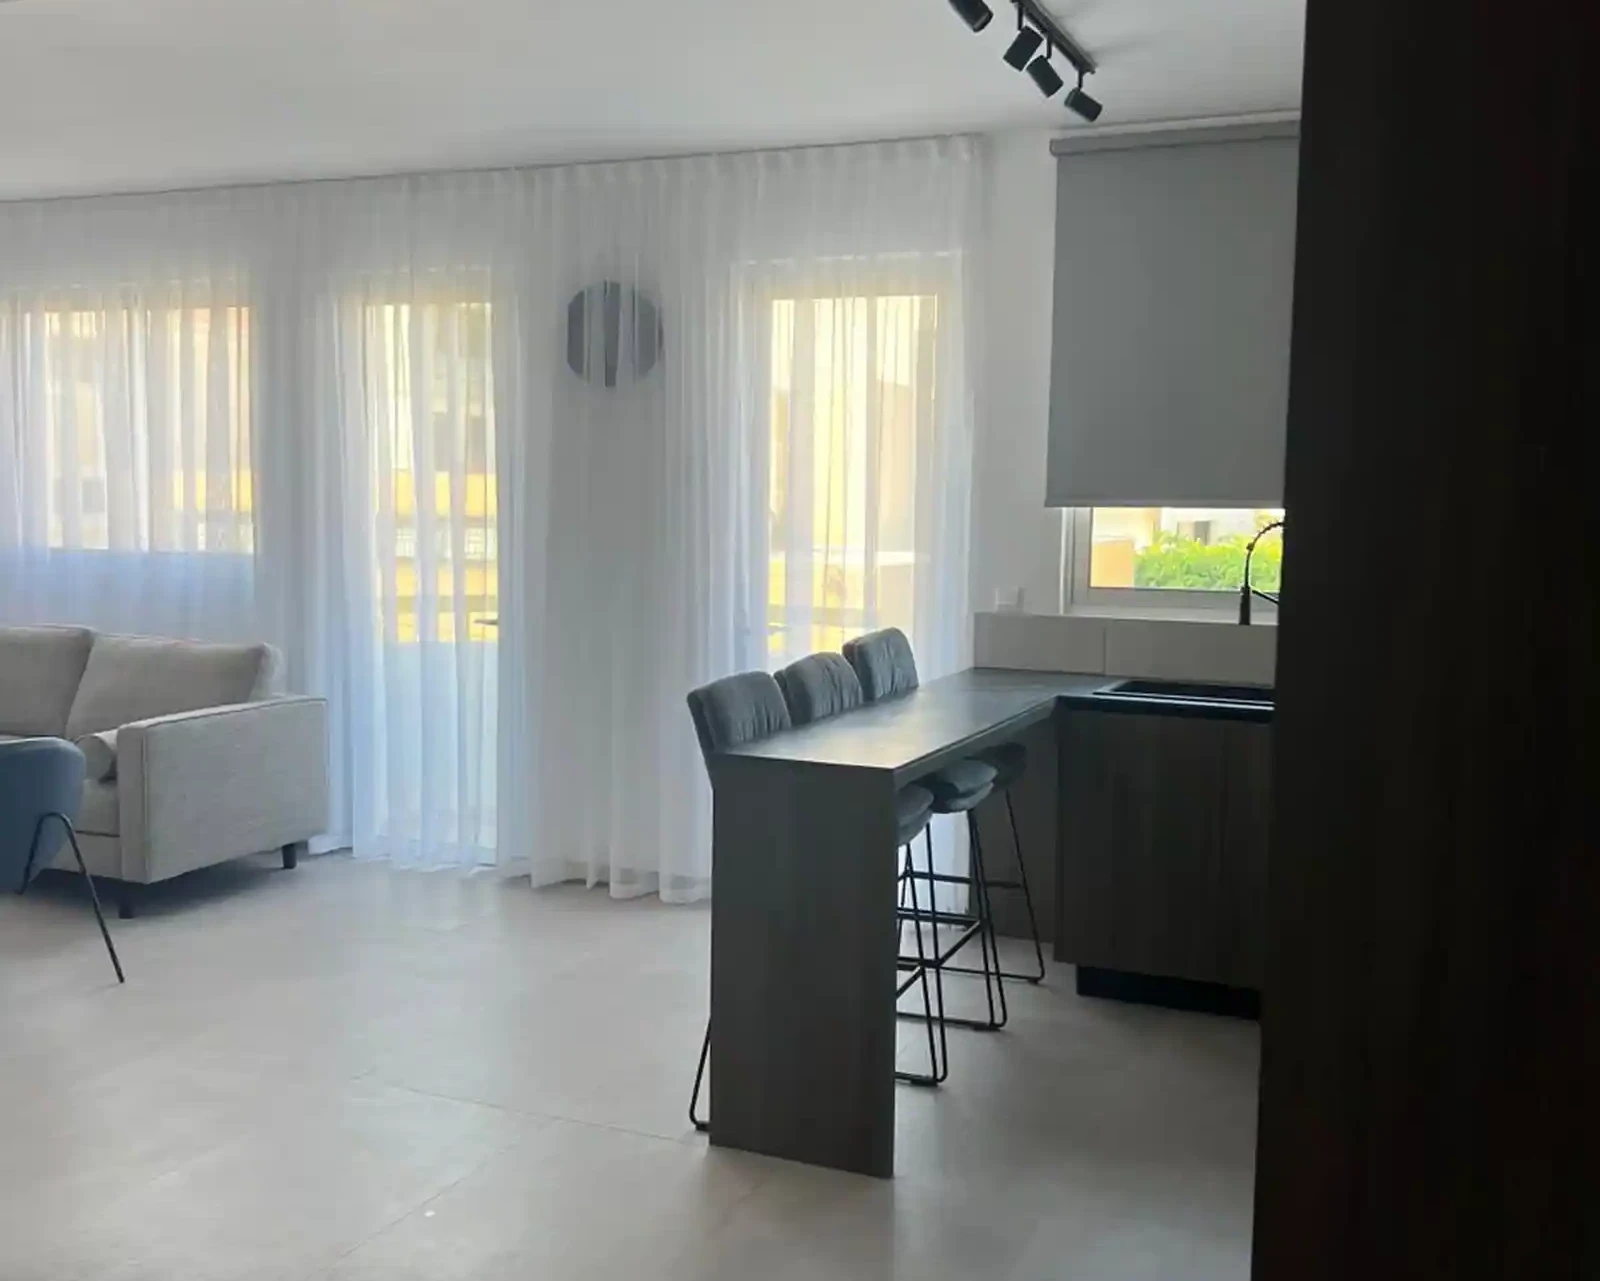 2-bedroom apartment to rent €2.200, image 1